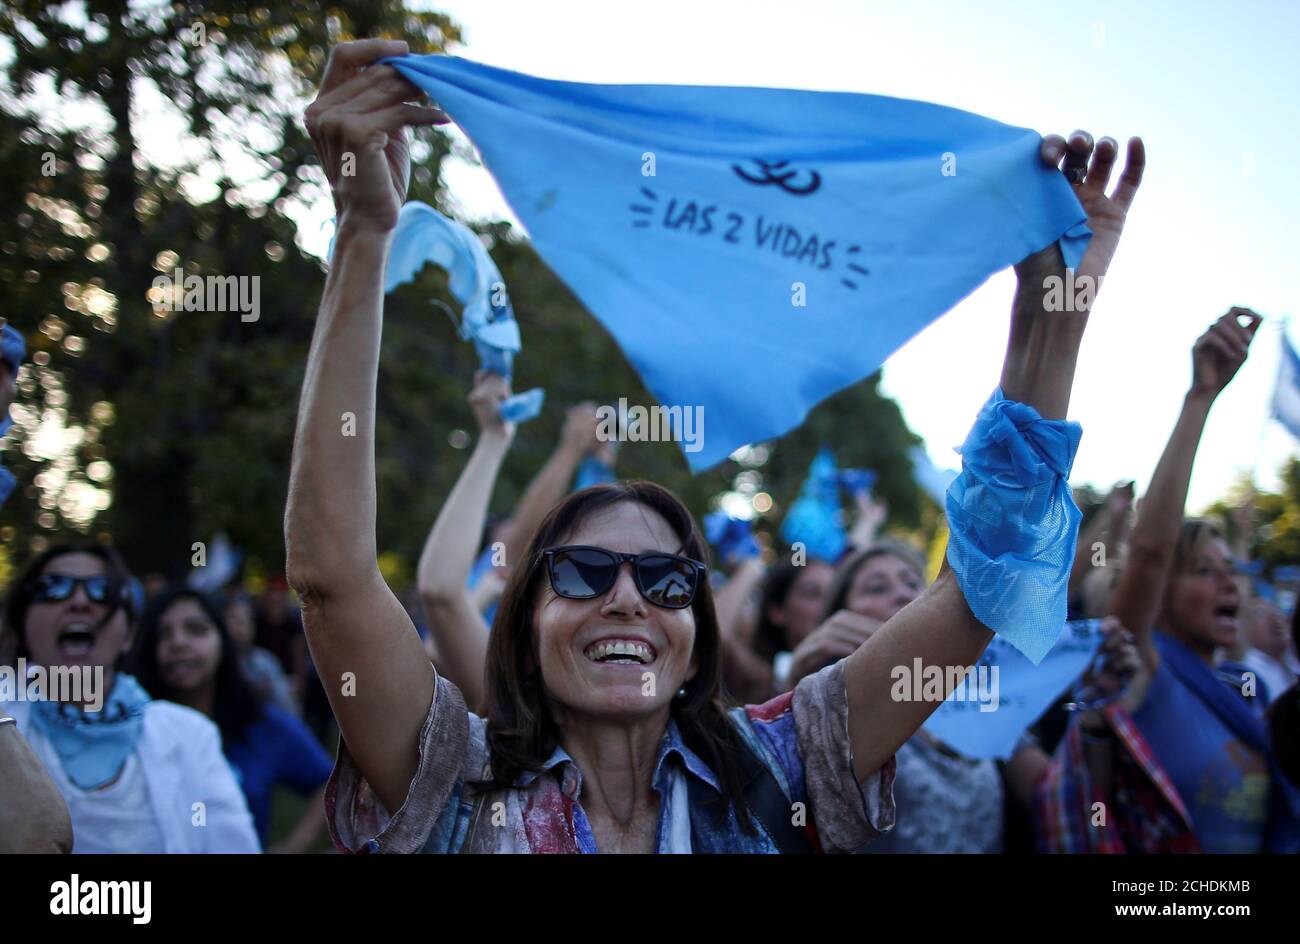 A woman shows a light blue handkerchief, which symbolises the anti-abortion movement, during an anti-abortion demonstration, in Buenos Aires, Argentina. March 23, 2019. REUTERS/Agustin Marcarian Stock Photo